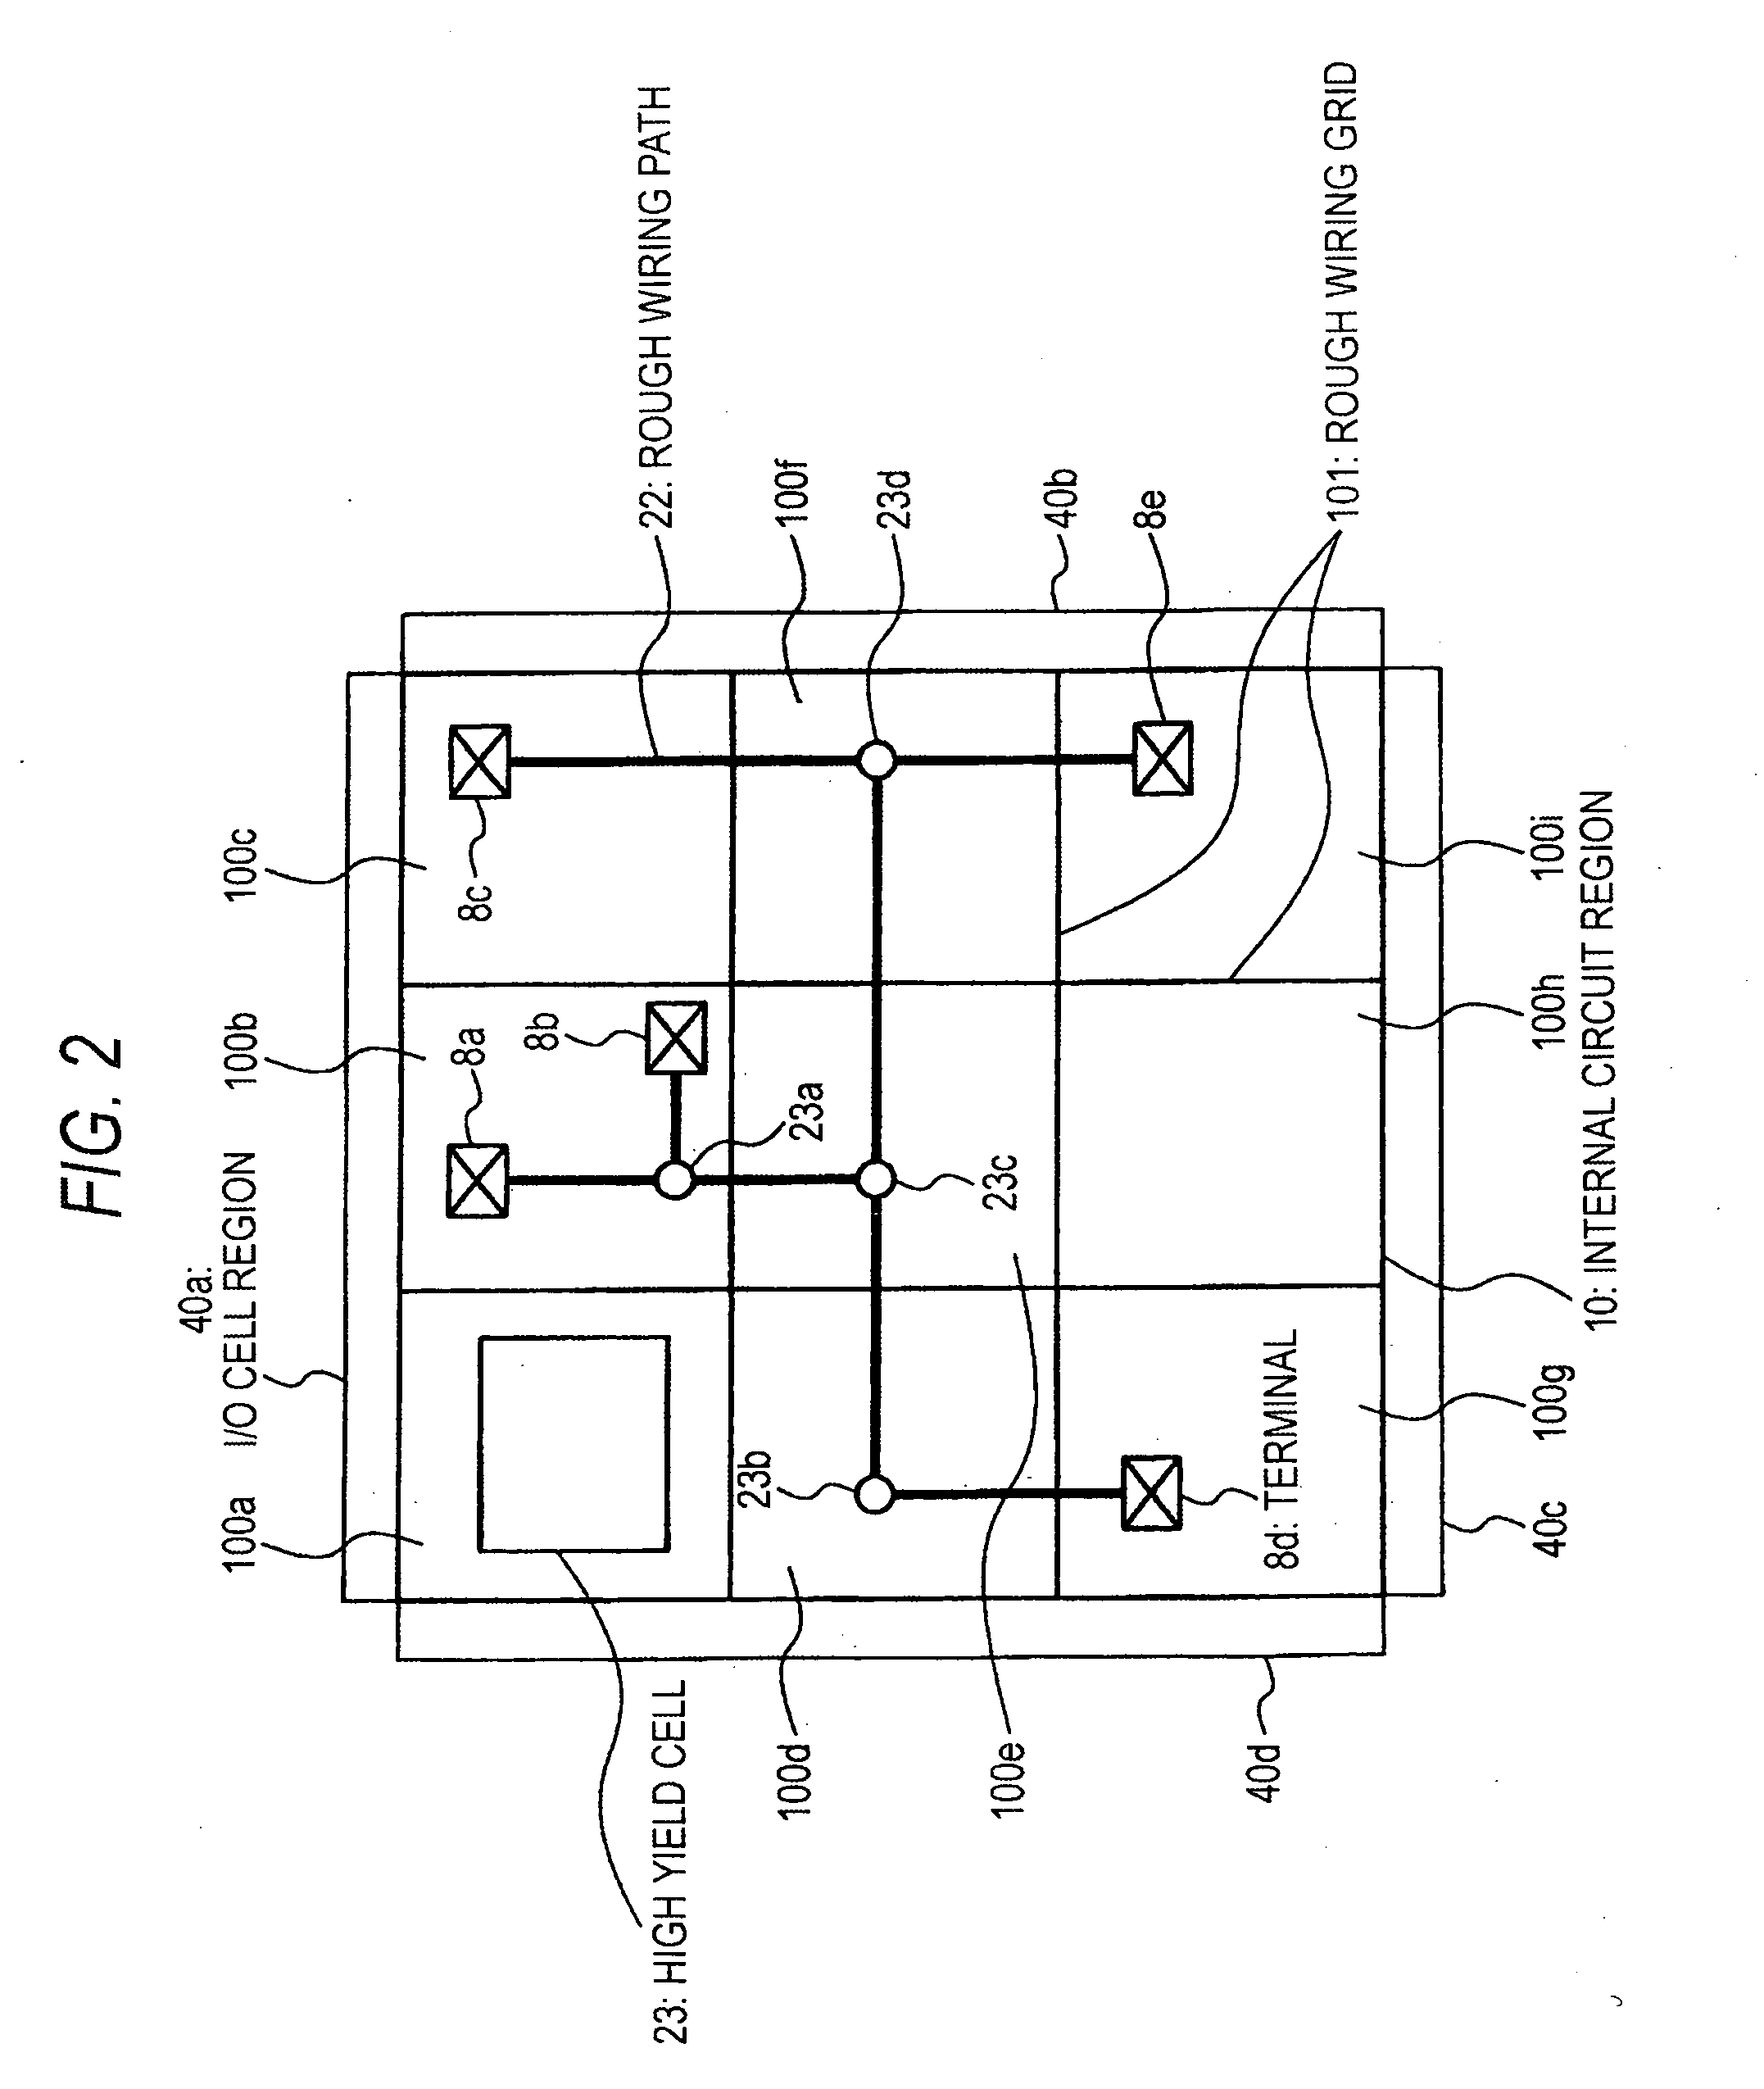 Design support system of semiconductor integrated circuit, method of designing semiconductor integrated circuit, design support program of semiconductor integrated circuit and method of manufacturing semiconductor integrated circuit